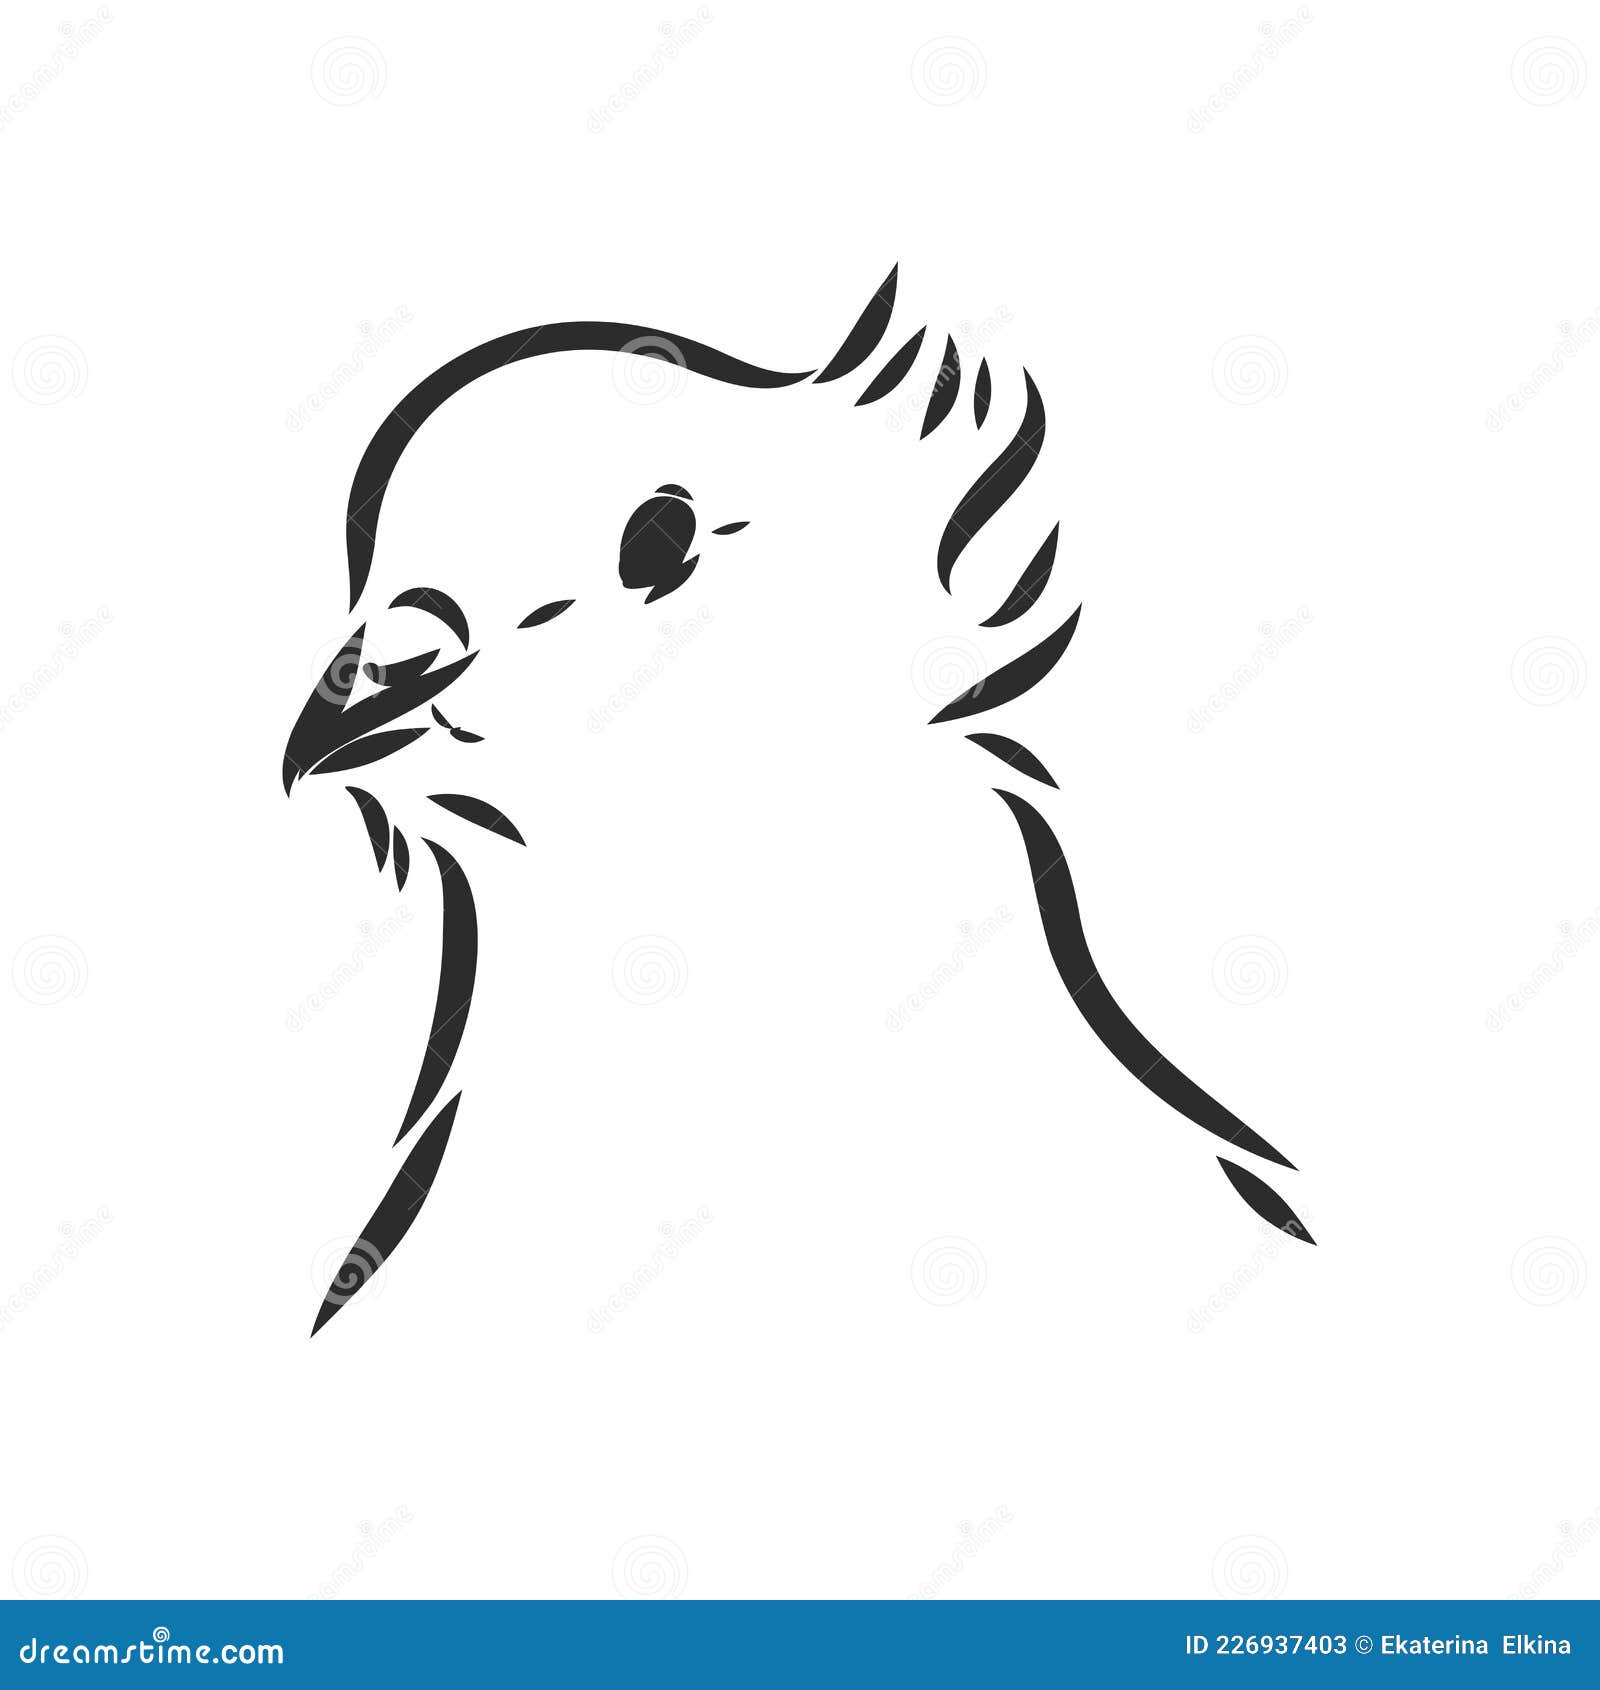 17043 Dove Tattoos Images Stock Photos  Vectors  Shutterstock